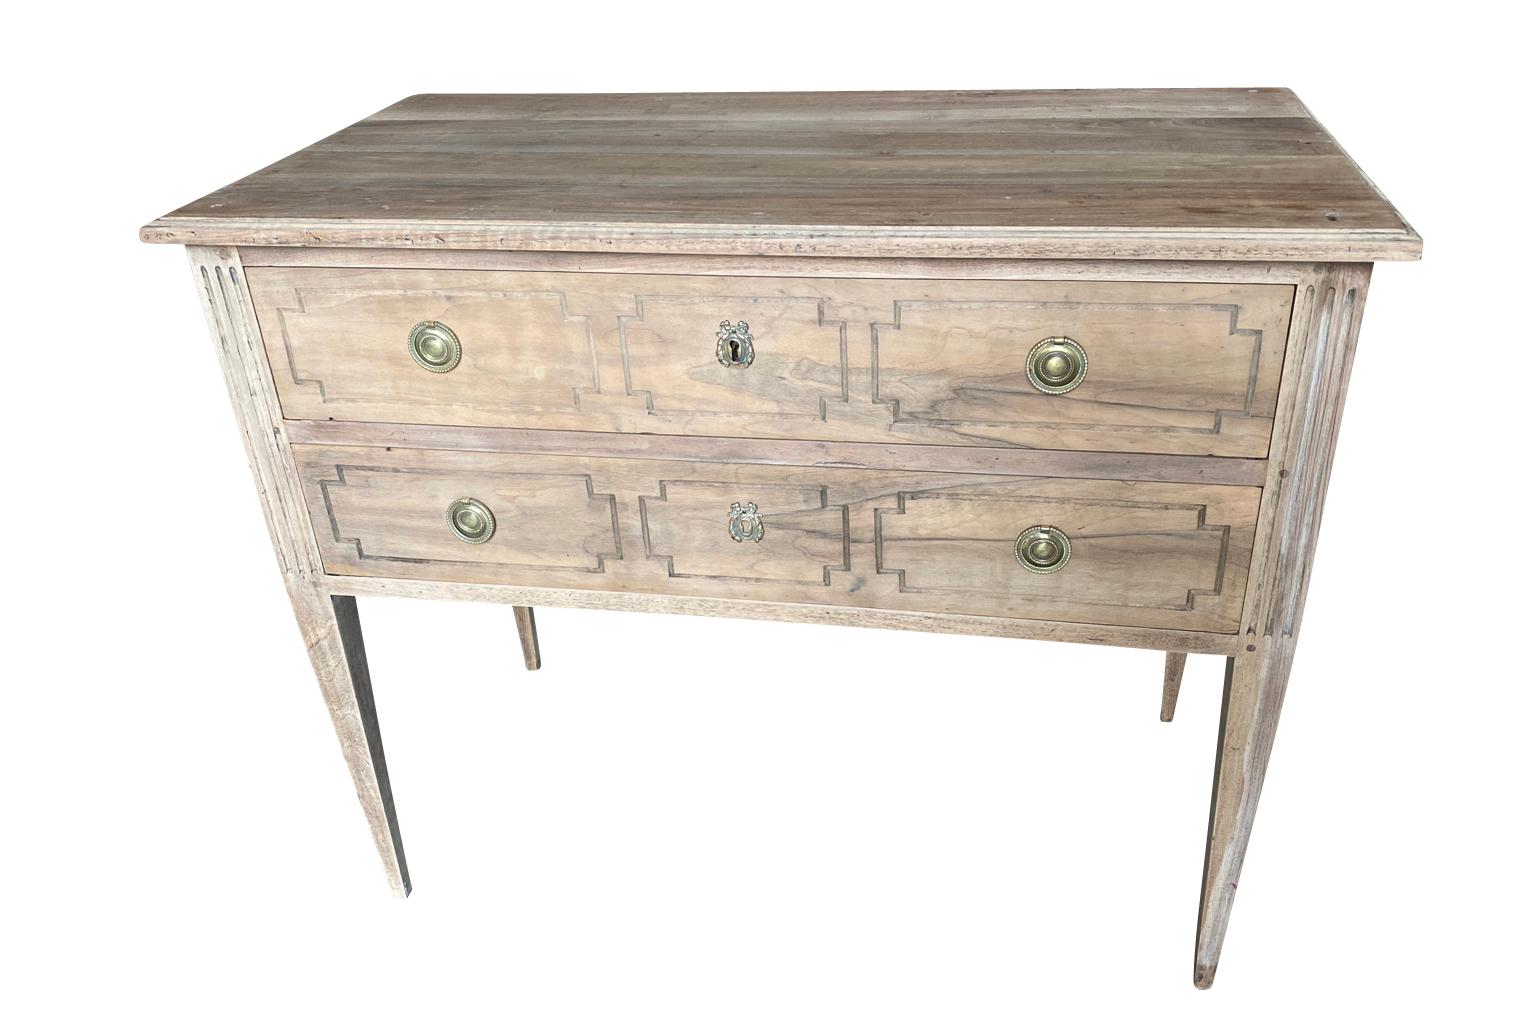 A very lovely Louis XVI style Sautuese commode from the Provence region of France. Beautifully constructed from walnut with 2 drawers over tapered legs. Perfect as a bedside cabinet or converted into a bathroom vanity.